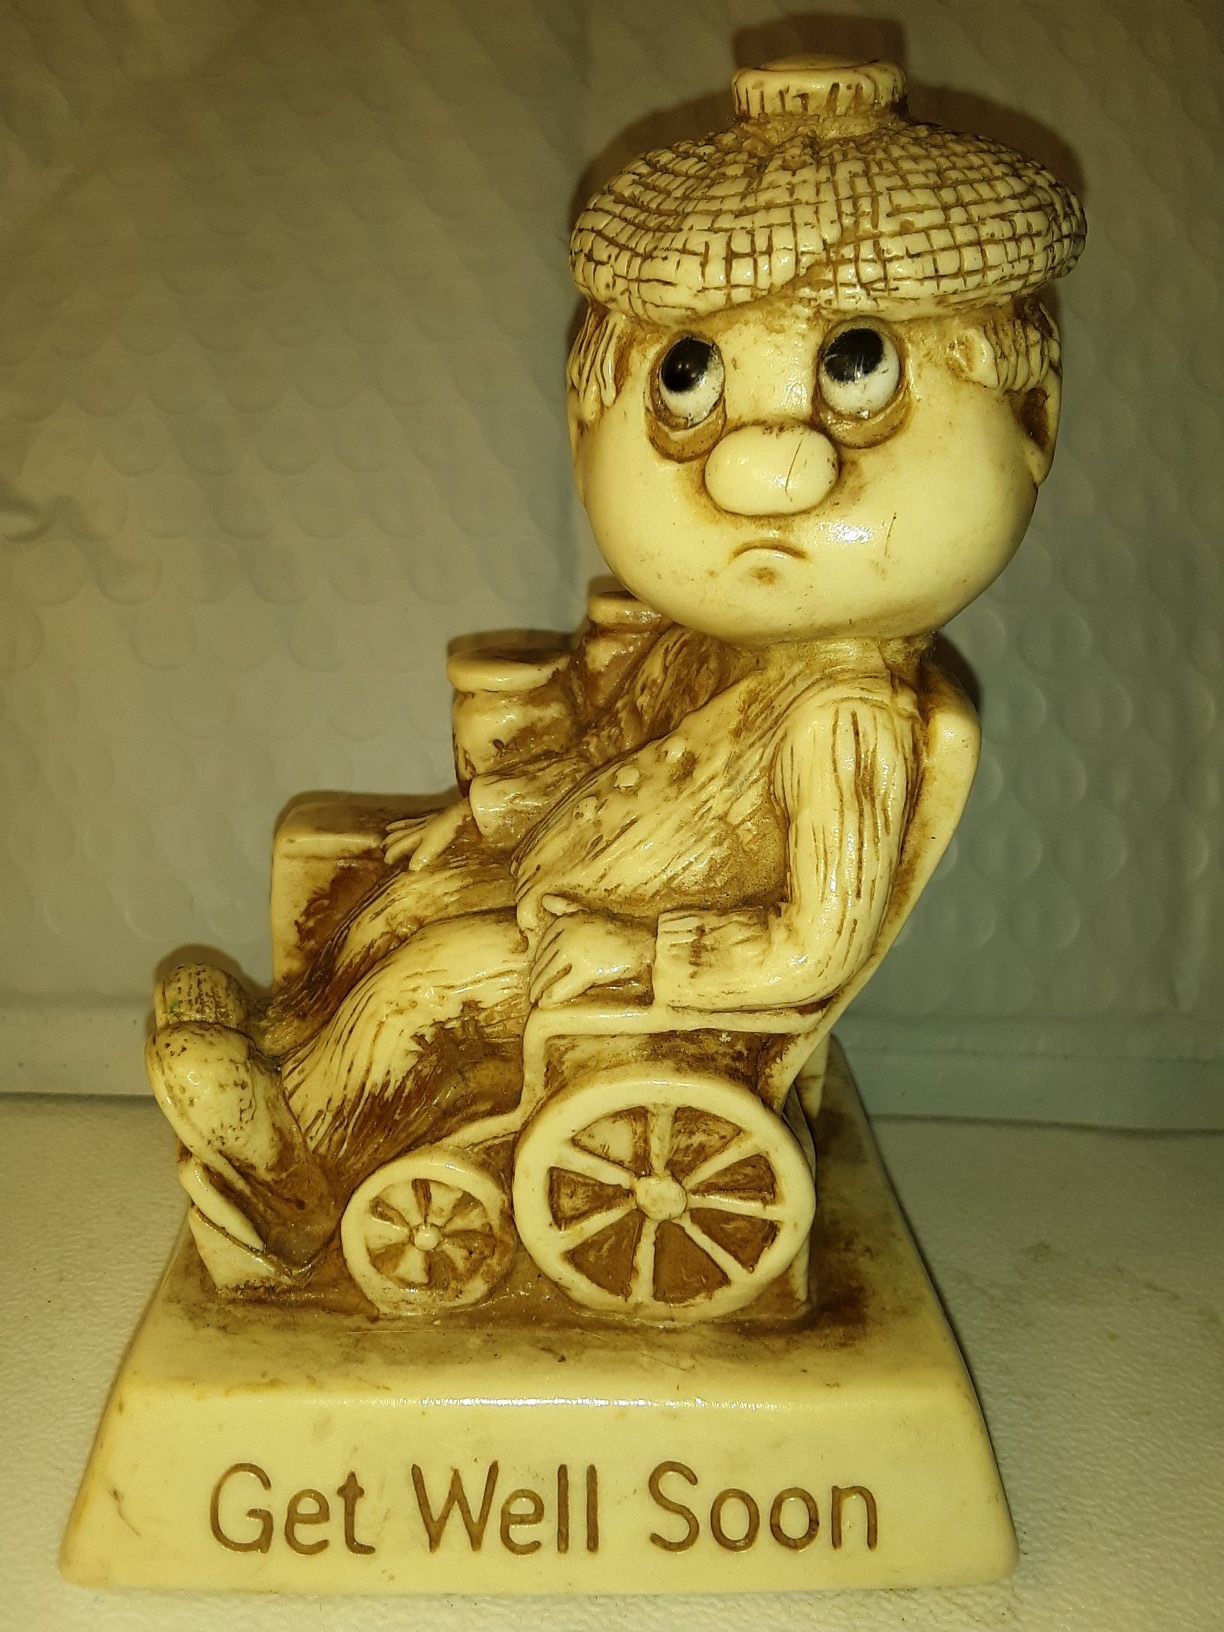 RUSS BERRIE & CO. "GET WELL SOON" COLLECTIBLE STATUE